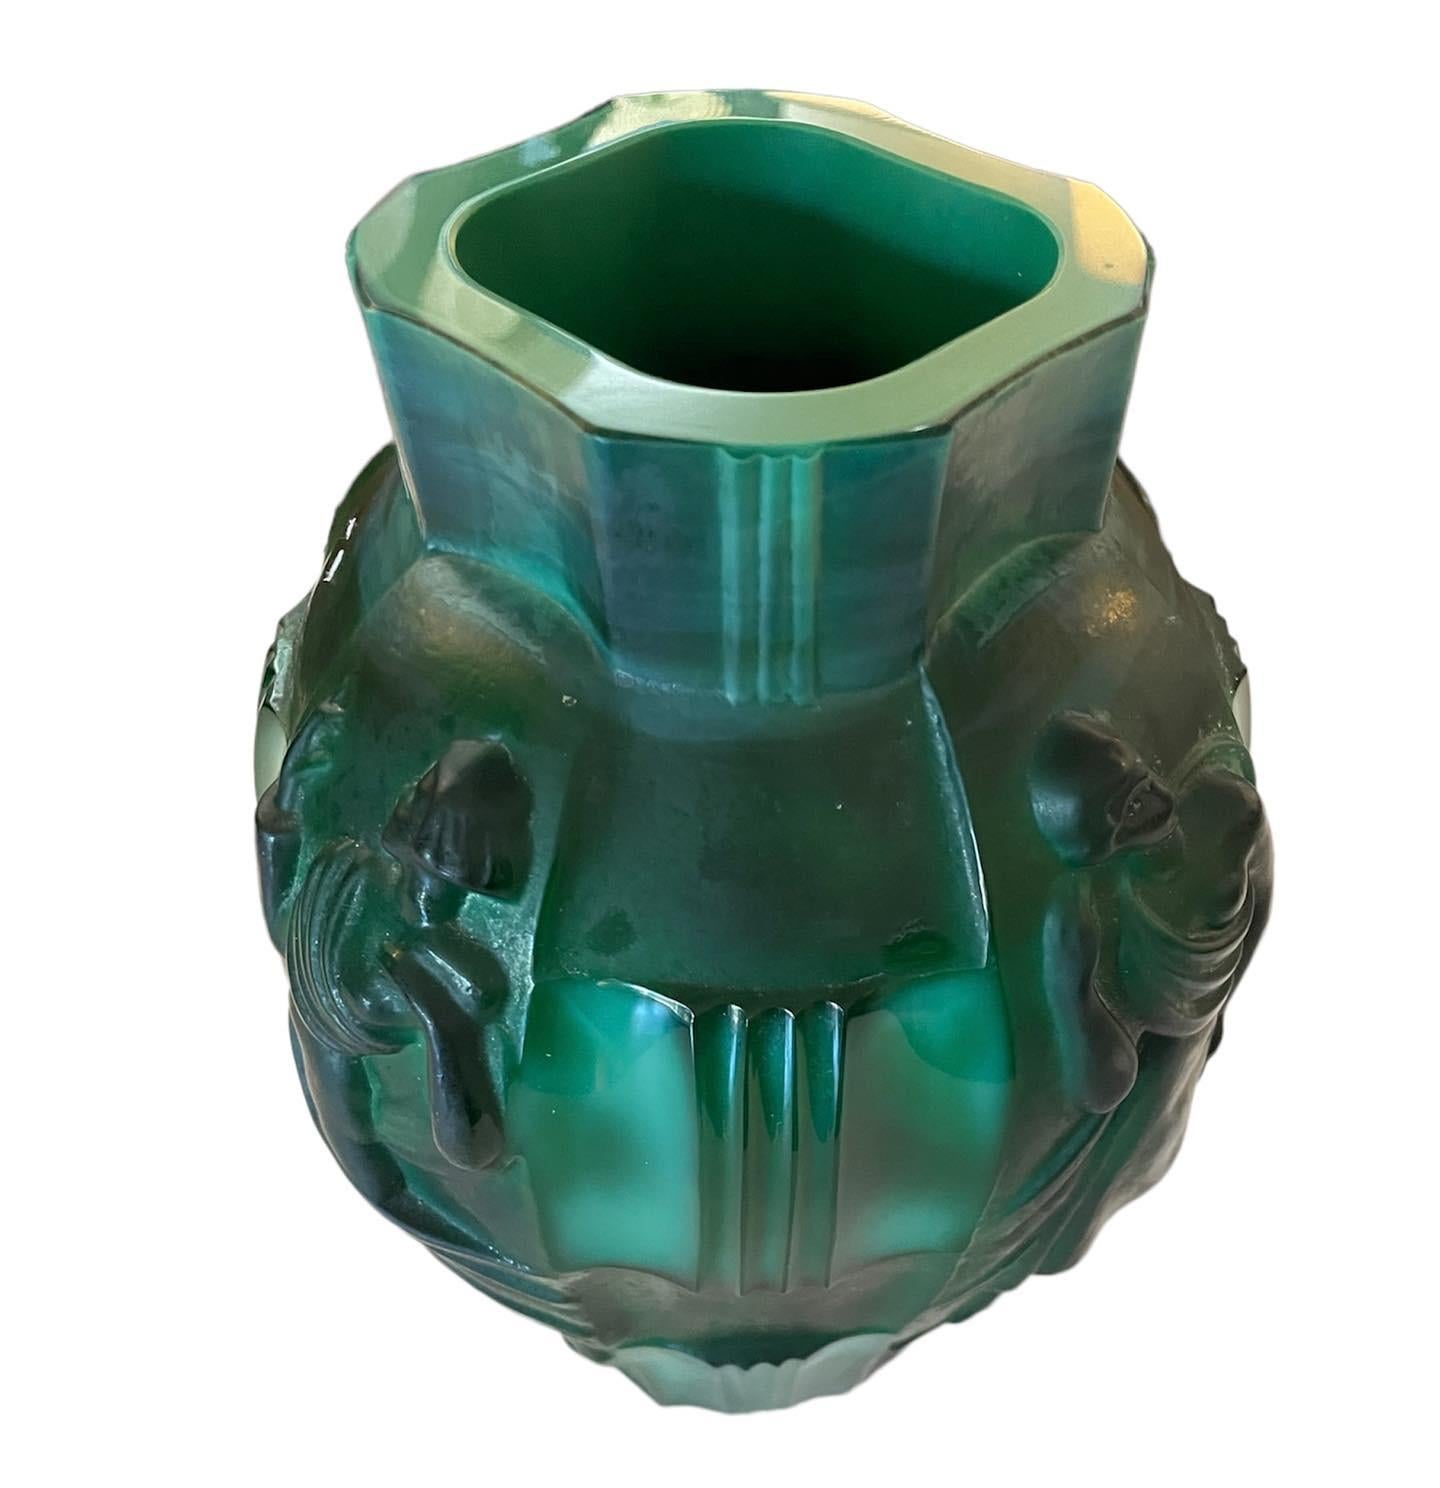 A absoluly stunning Art Deco Czechoslovakian malachite green glass vase moulded with figures designed by Artur Pleva for Curt Schlevogt. The vase combines polished and matted elements with four semi-clad female dancing figures set between carved